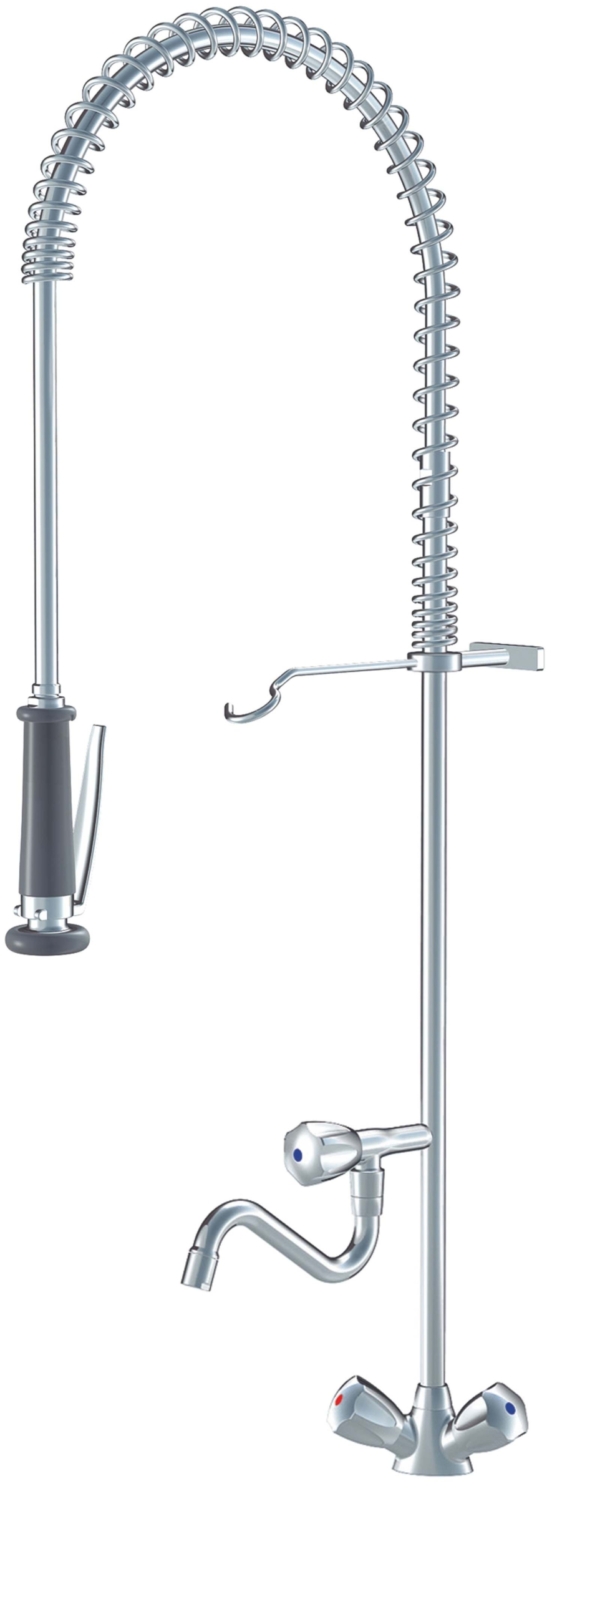 Shower heads for floor and wall mounting - 100675-100679